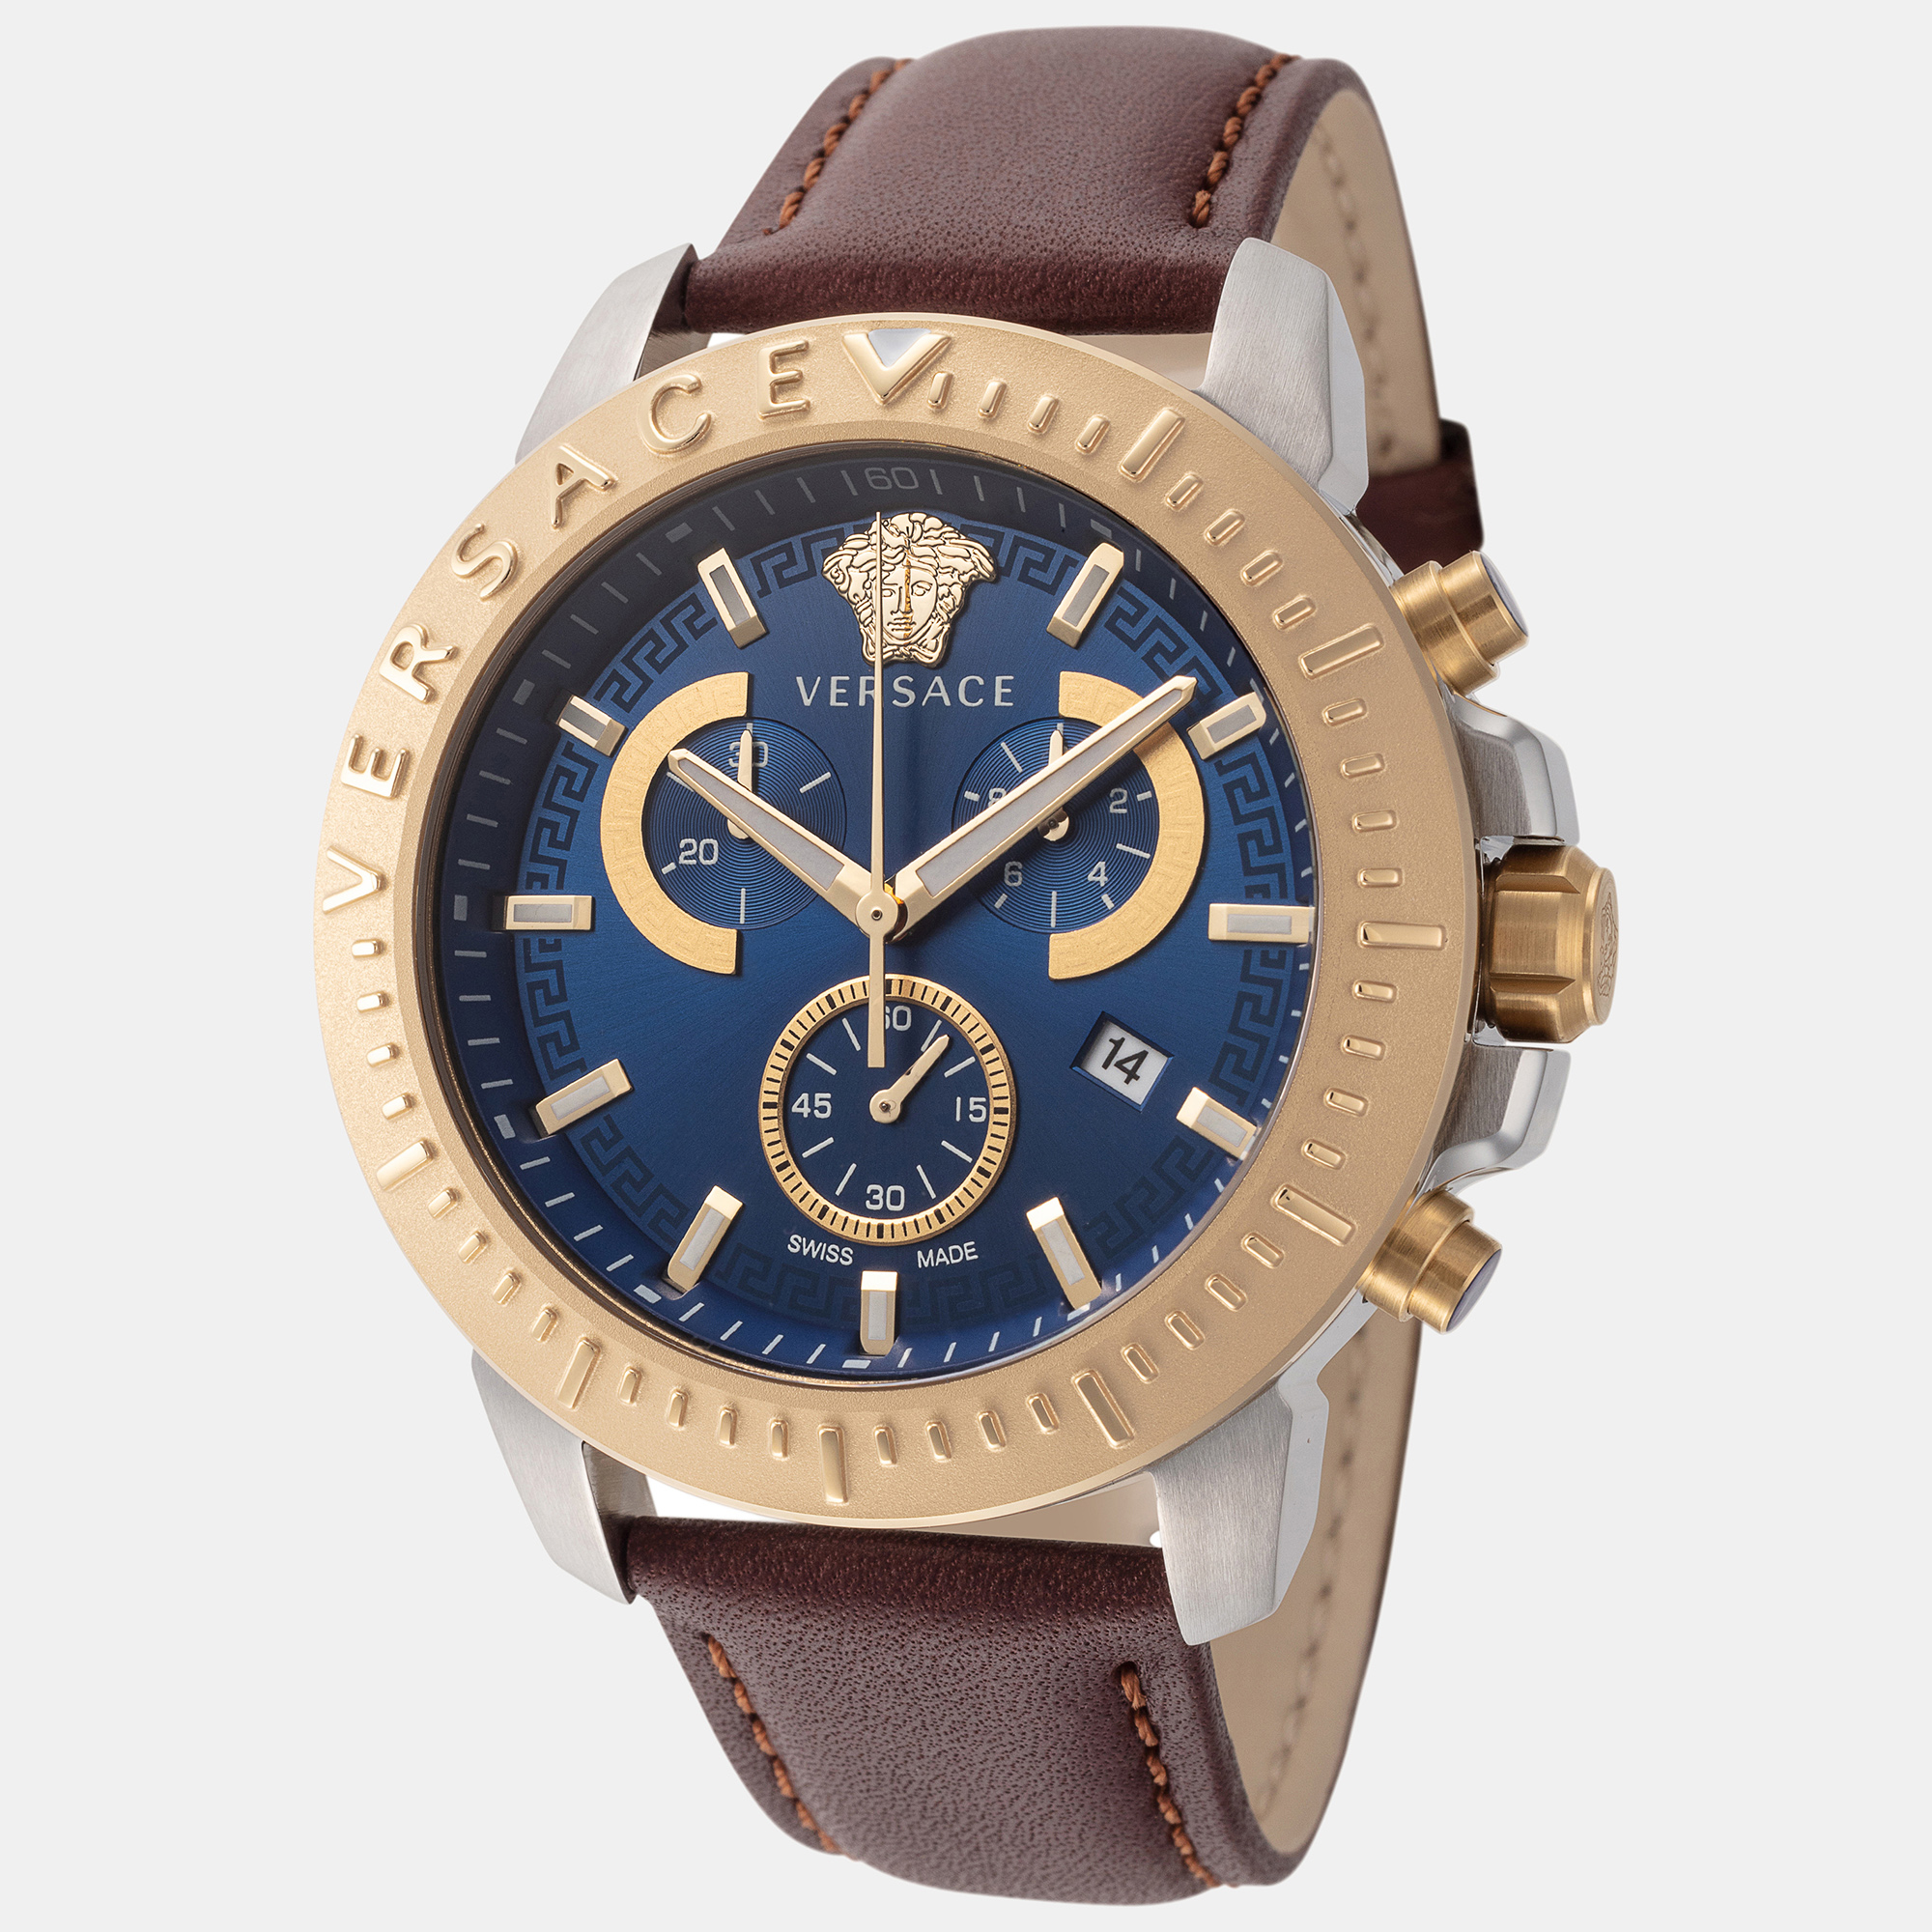 This authentic Versace watch is characterized by skillful craftsmanship and understated charm. Meticulously constructed to tell time in an elegant way it comes in a sturdy case and flaunts a seamless blend of innovative design and flawless style.